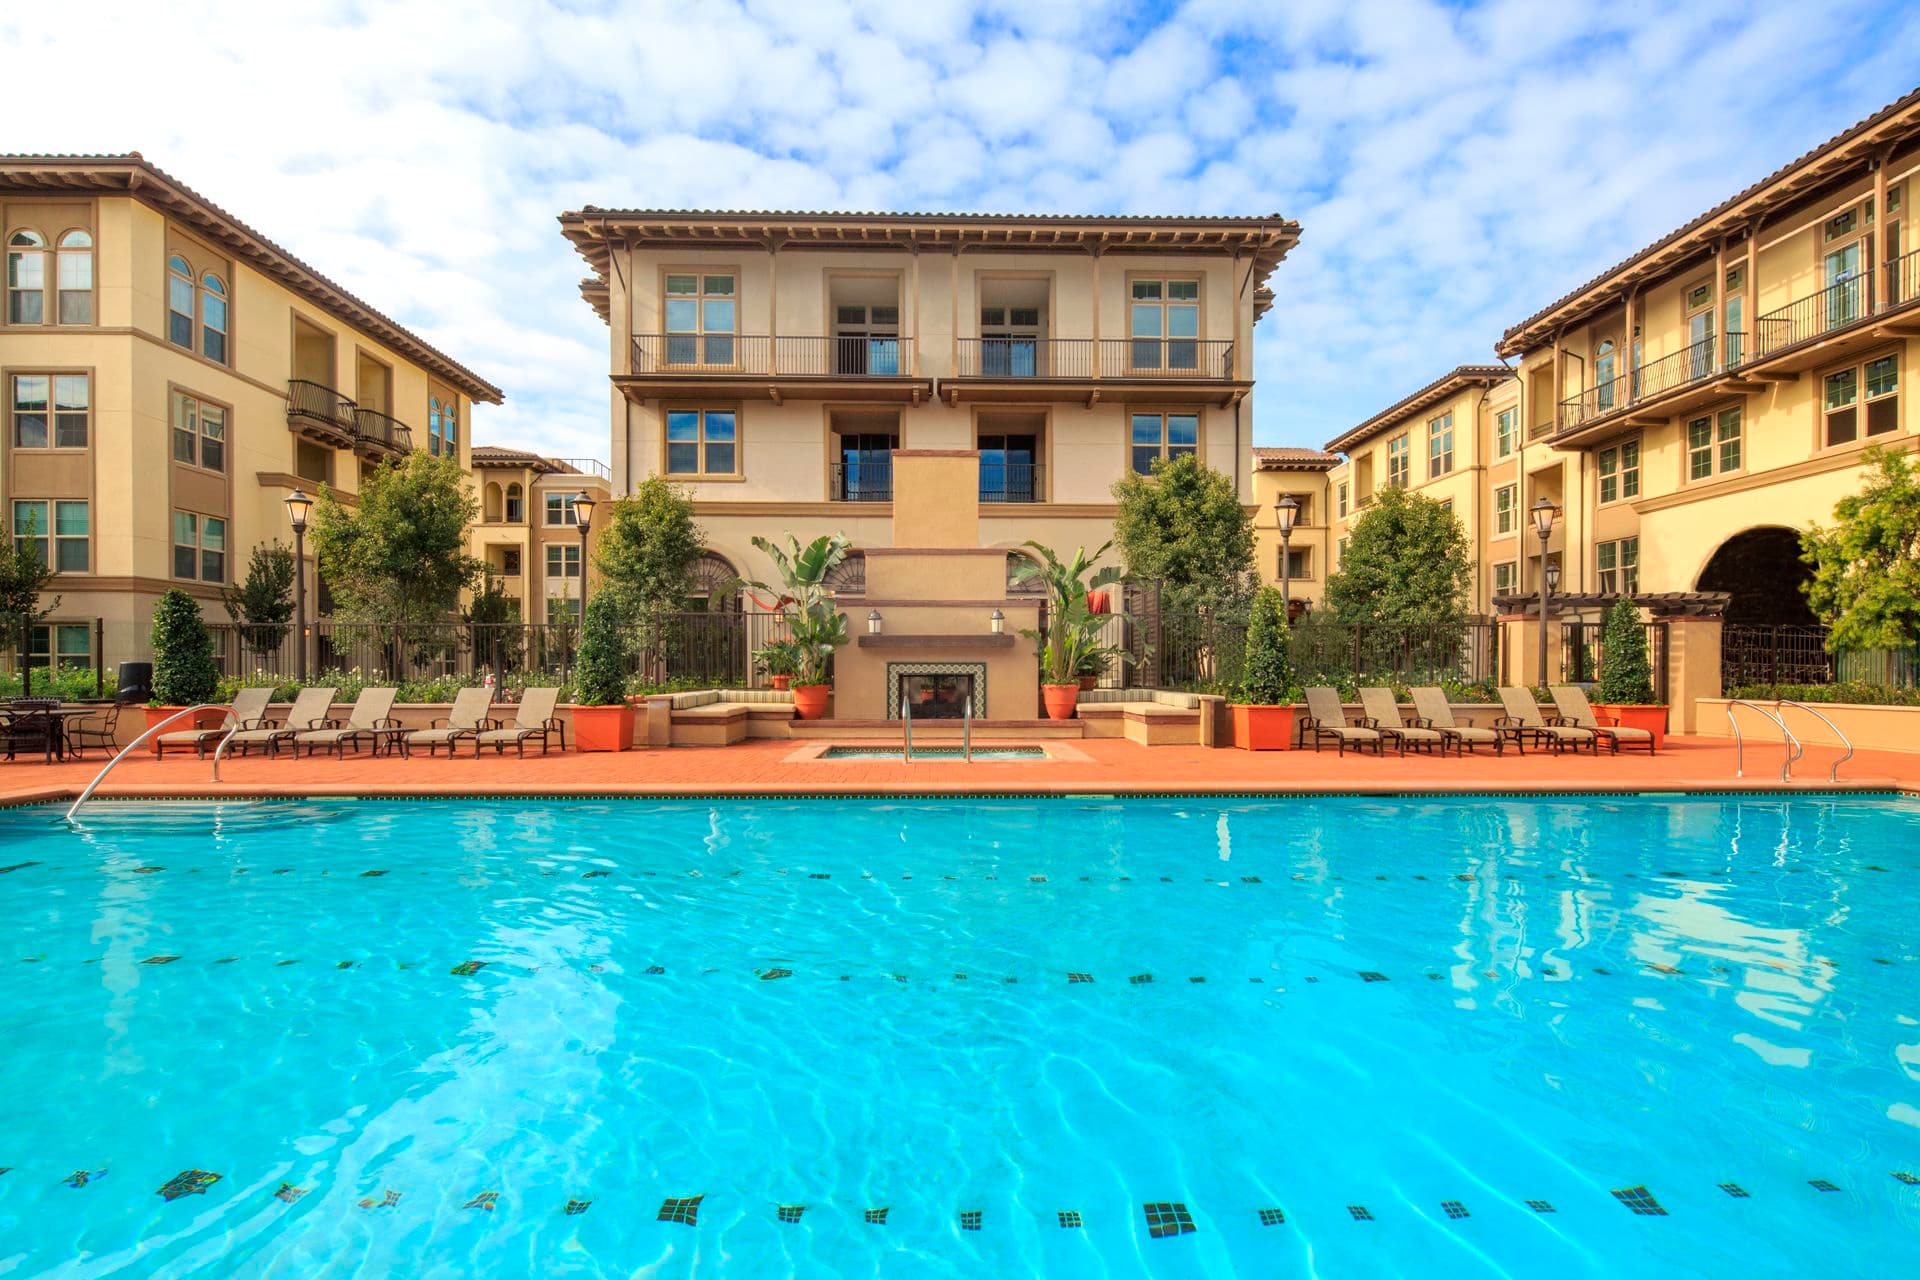 View of building exterior and pool at Verona at Crescent Village Apartment Homes in San Jose, CA.